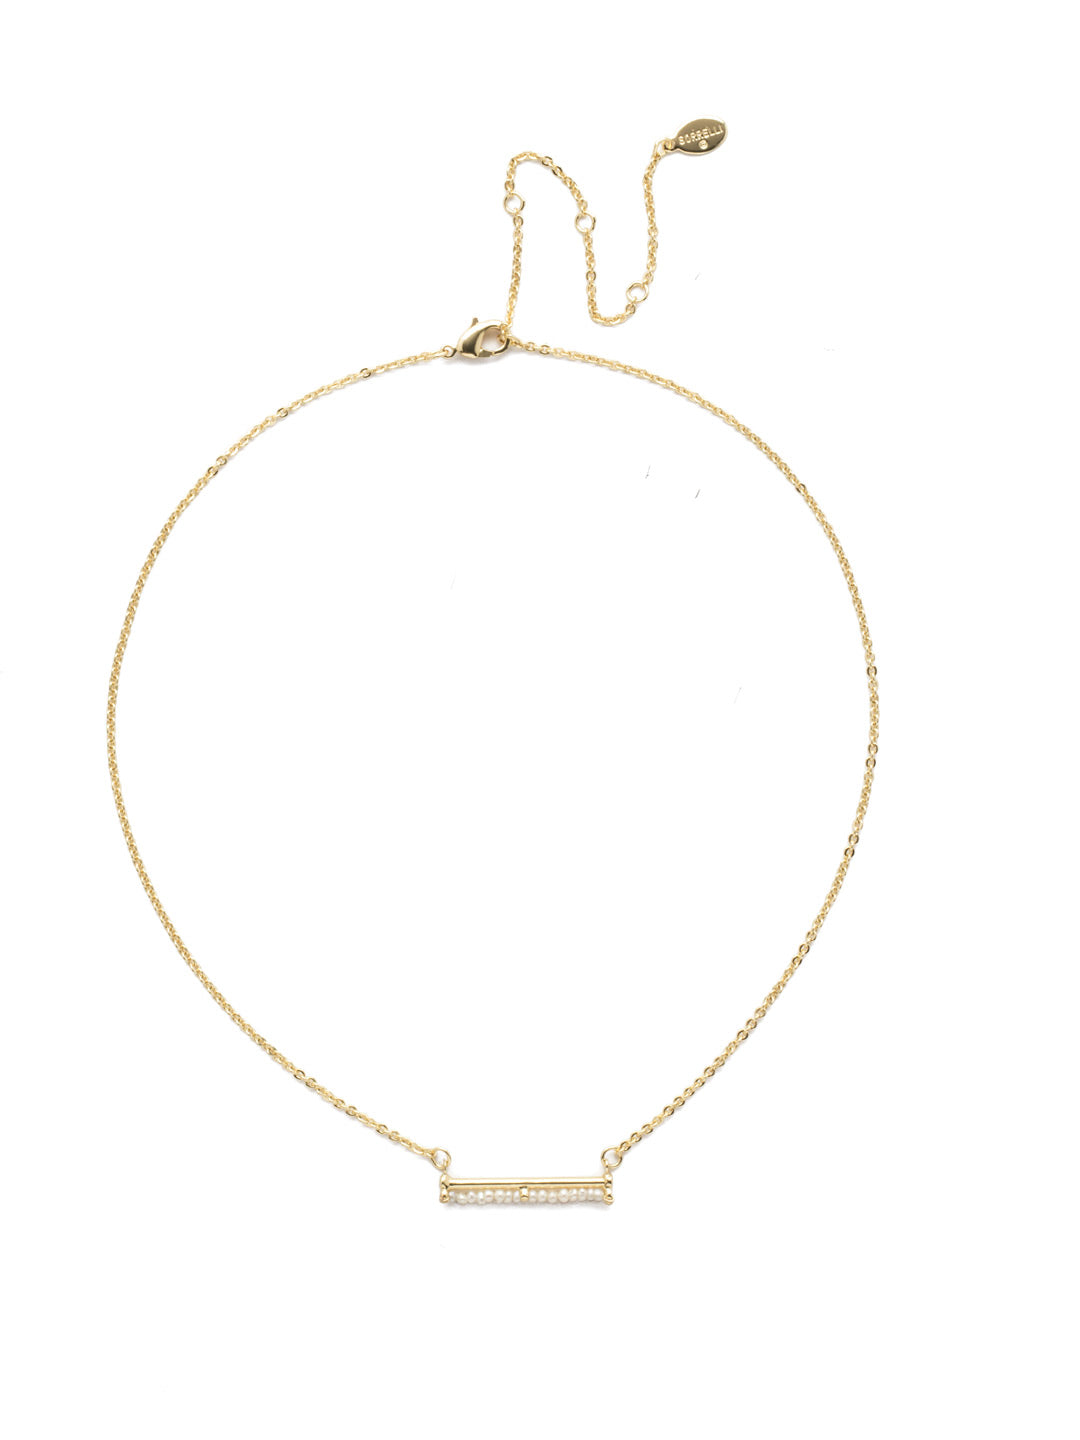 Elena Classic Necklace - NEC12BGPLP - <p>A subtle touch of elegance to add to any outfit, this necklace keeps it simple with a delicate chain and bar detail lined with miniature pearls. From Sorrelli's Polished Pearl collection in our Bright Gold-tone finish.</p>